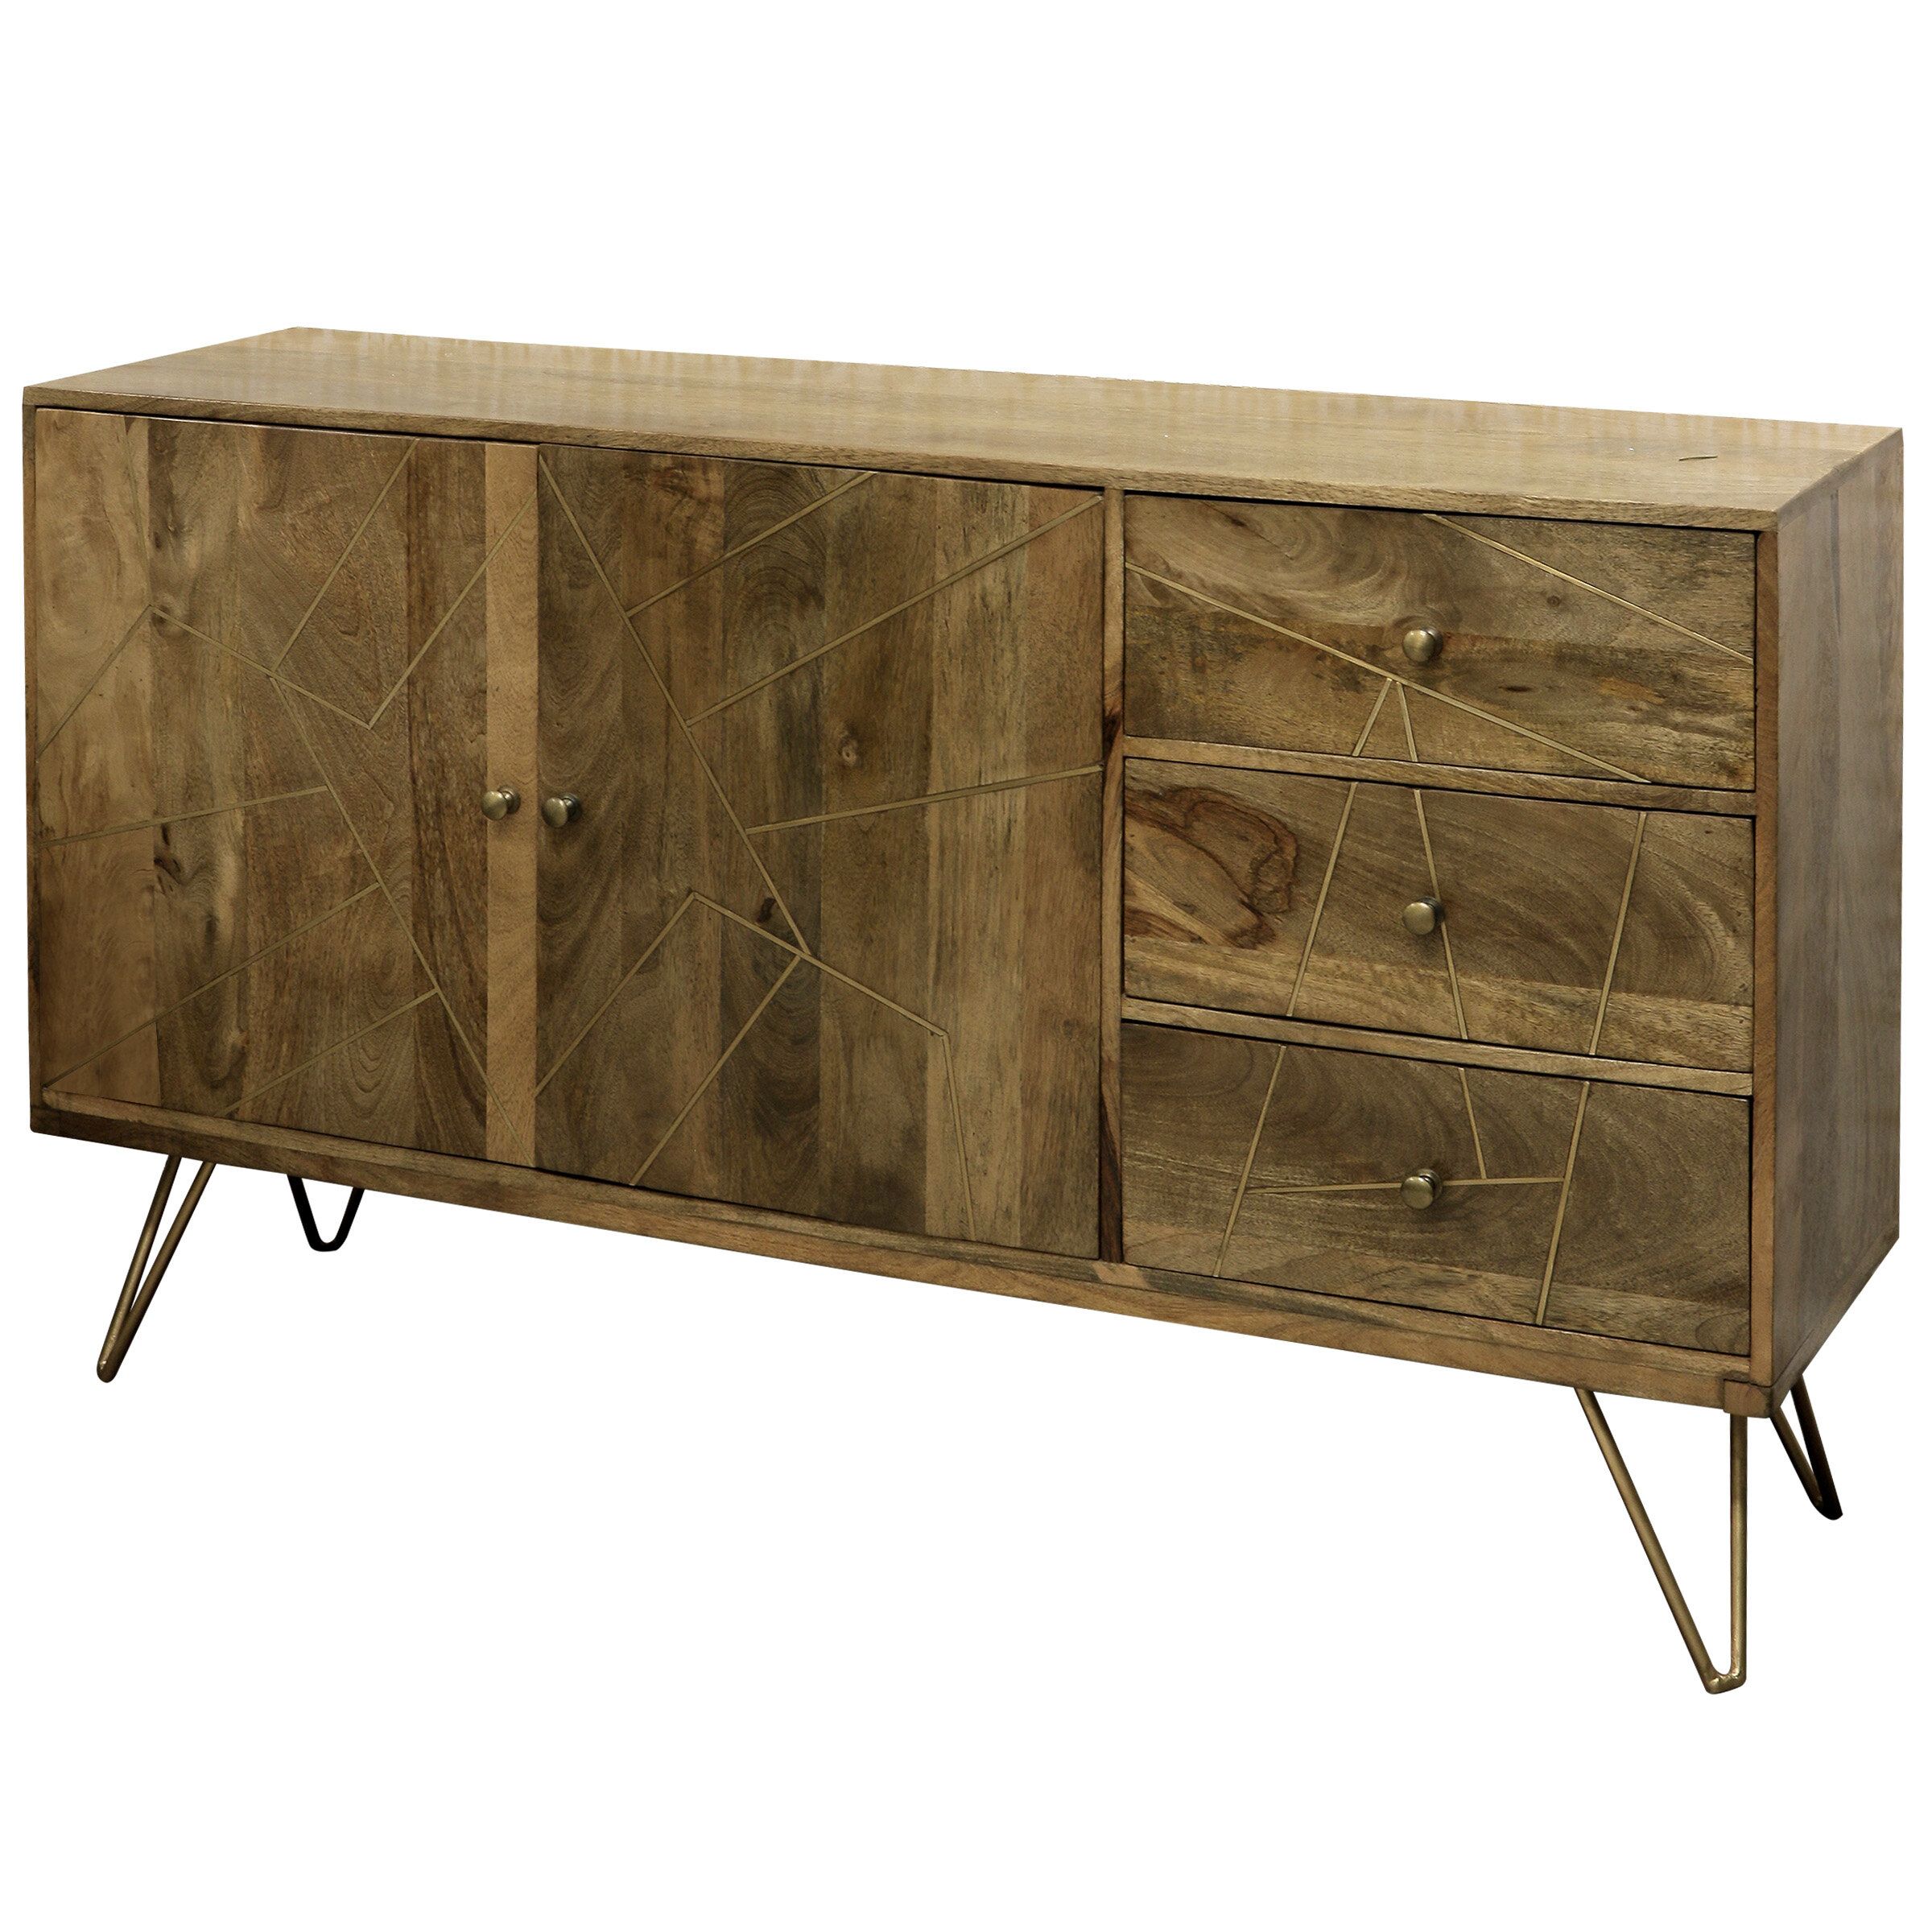 Thin Credenza You'll Love In 2019 | Wayfair Throughout Fleurette Night Credenzas (View 28 of 30)